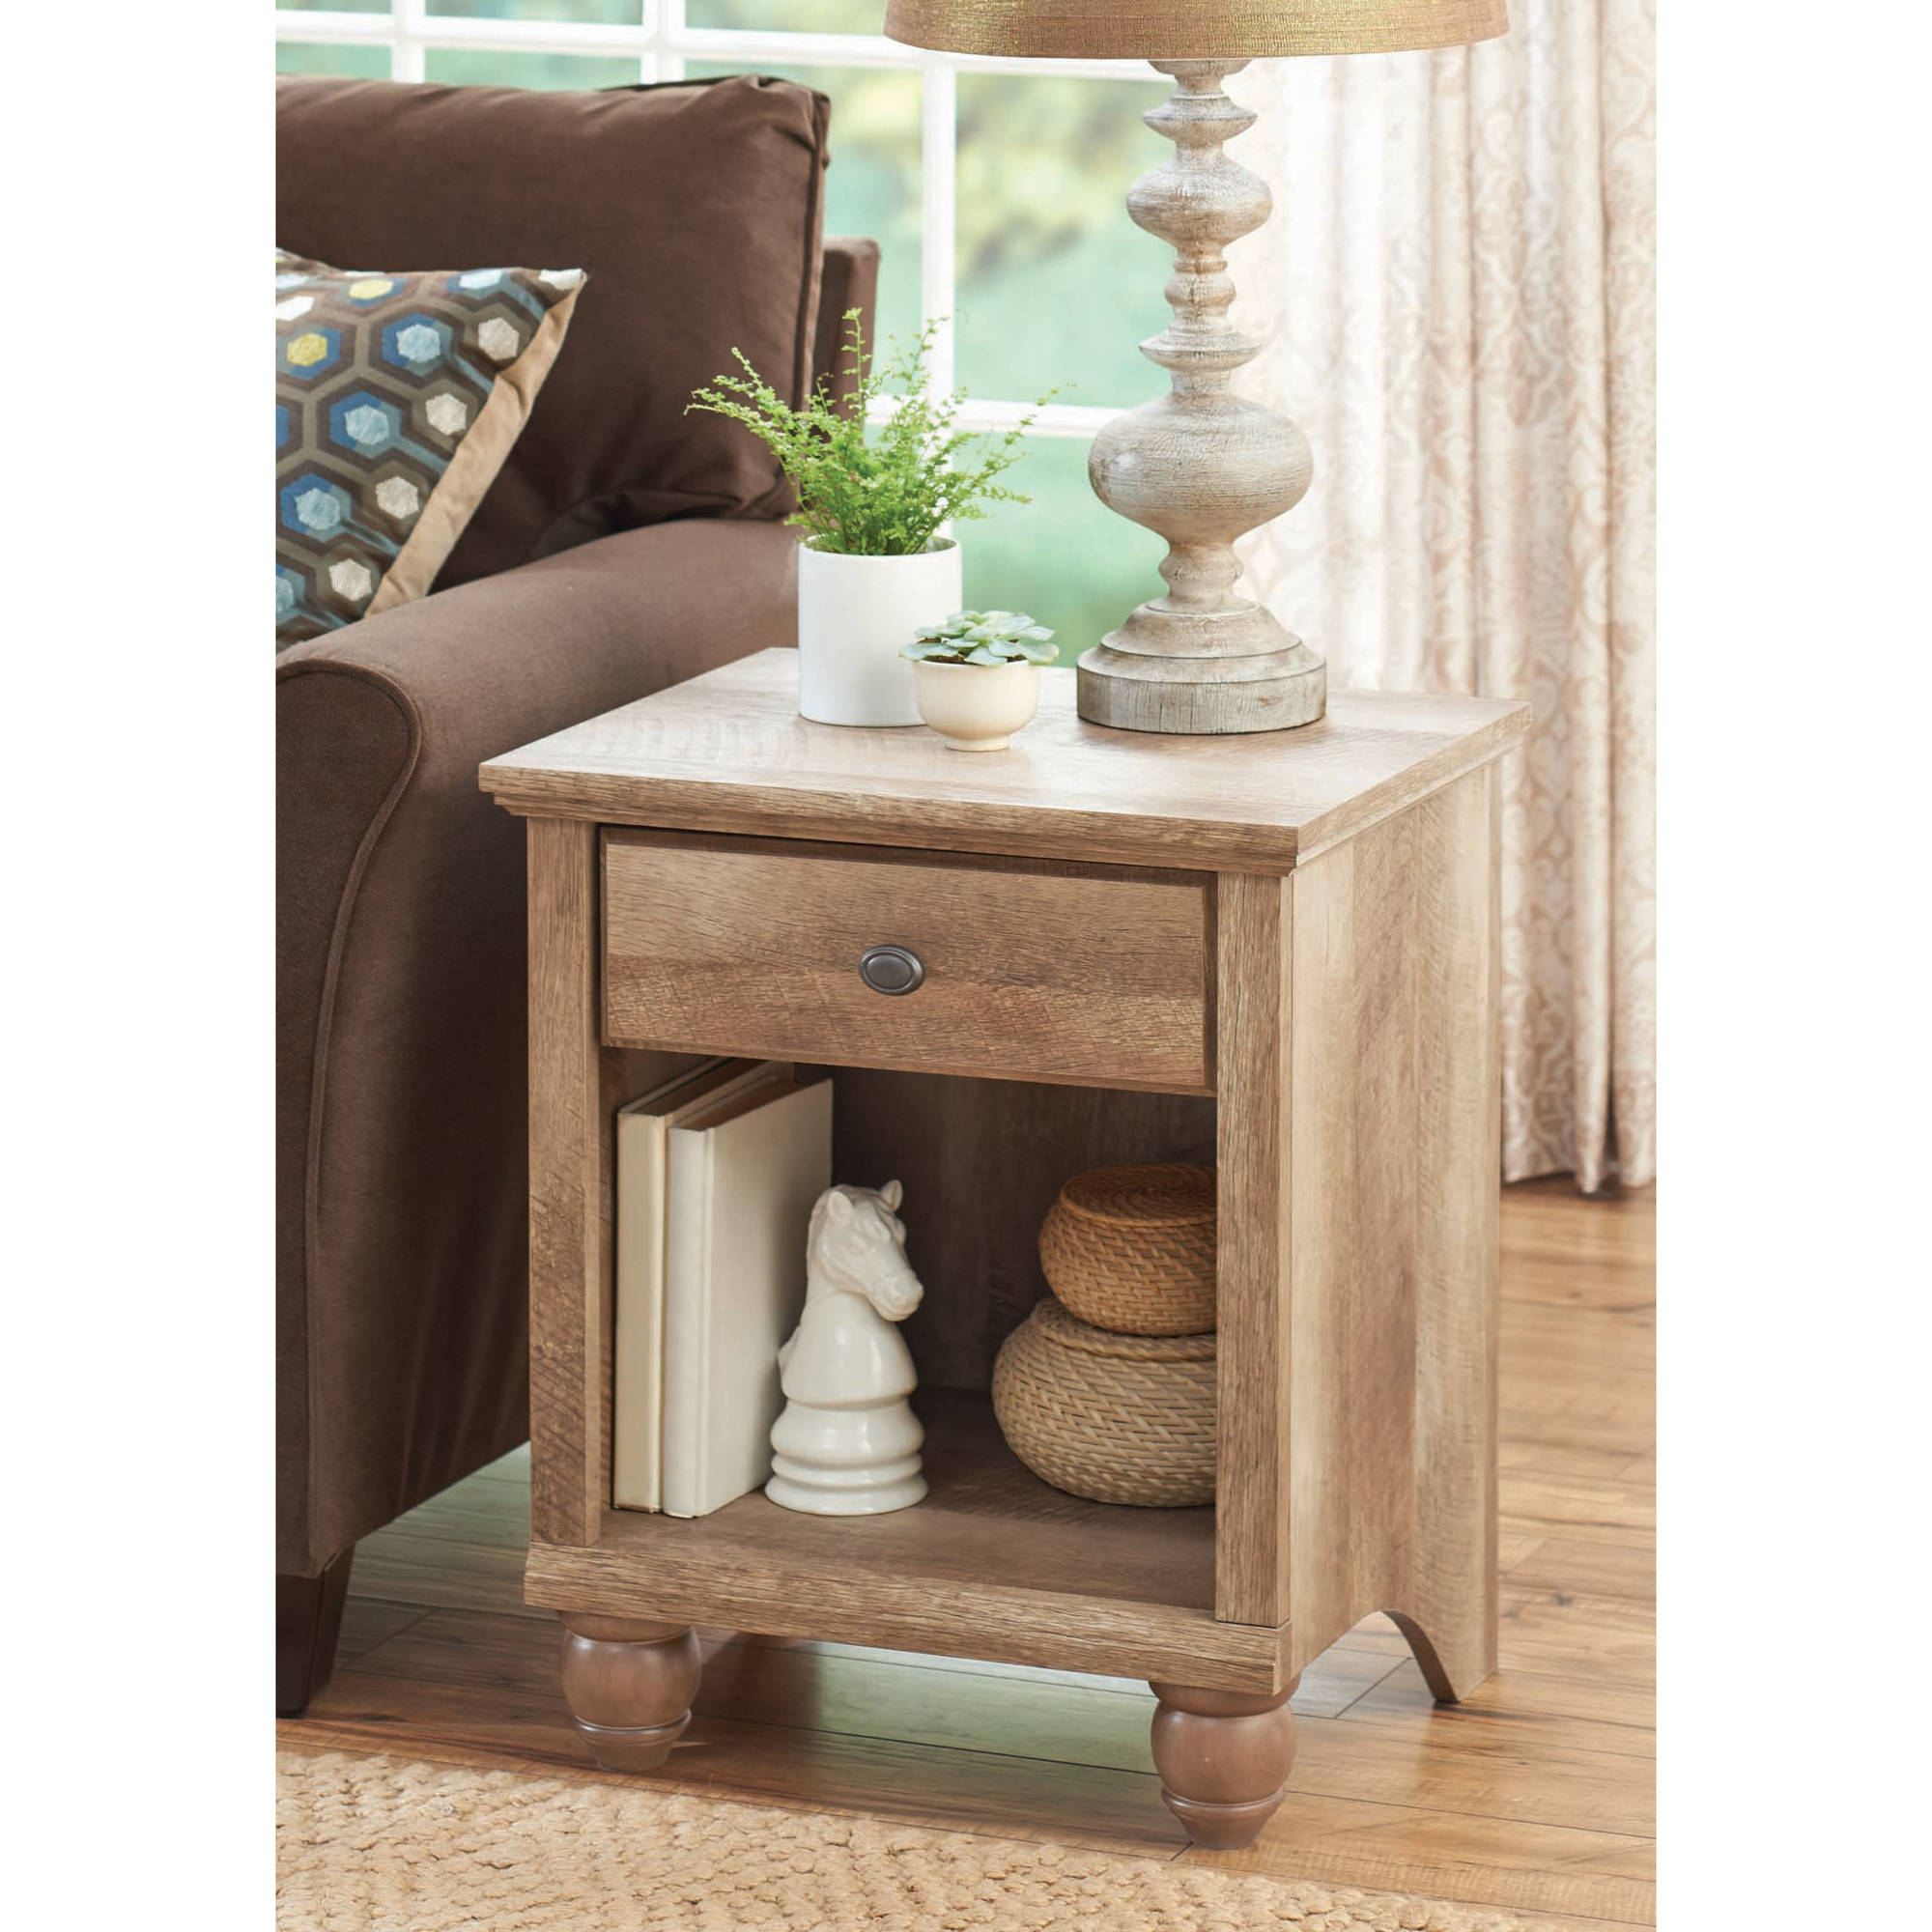 Better Homes & Gardens Crossmill Accent Table, Weathered Finish - image 5 of 8